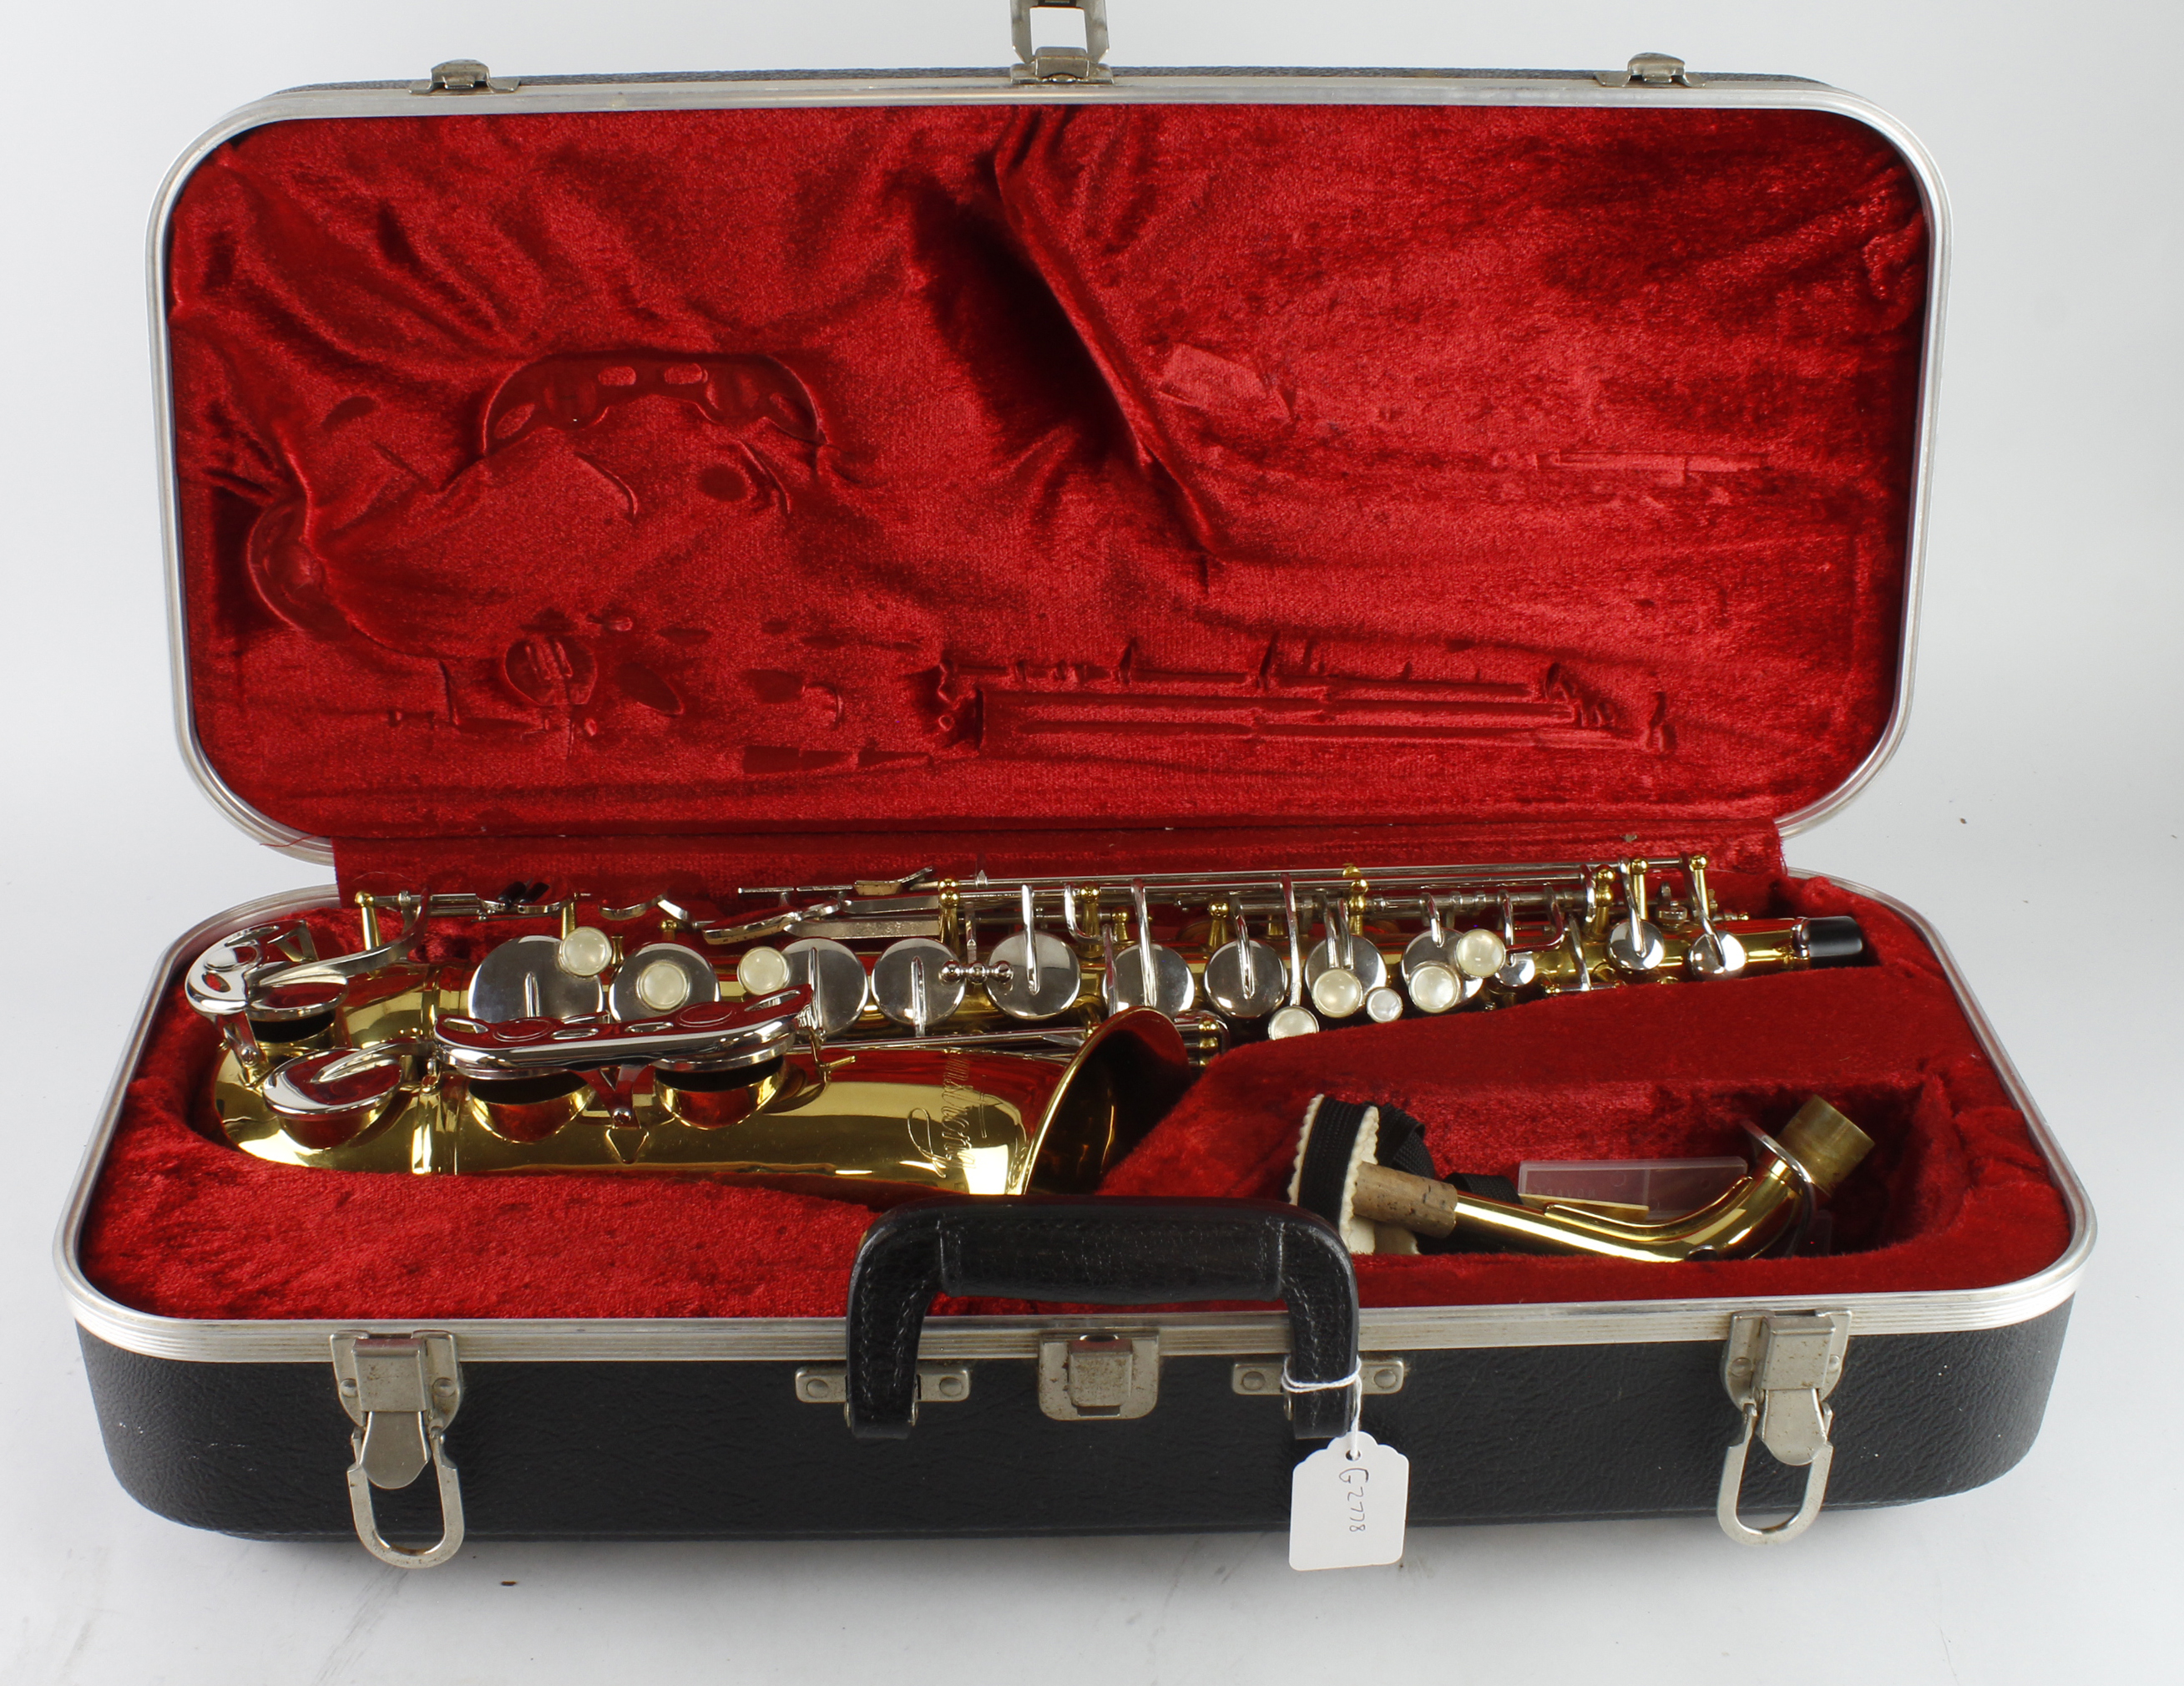 Armstrong saxophone (no. 4001723), neck piece presentm contained in fitted Armstrong case